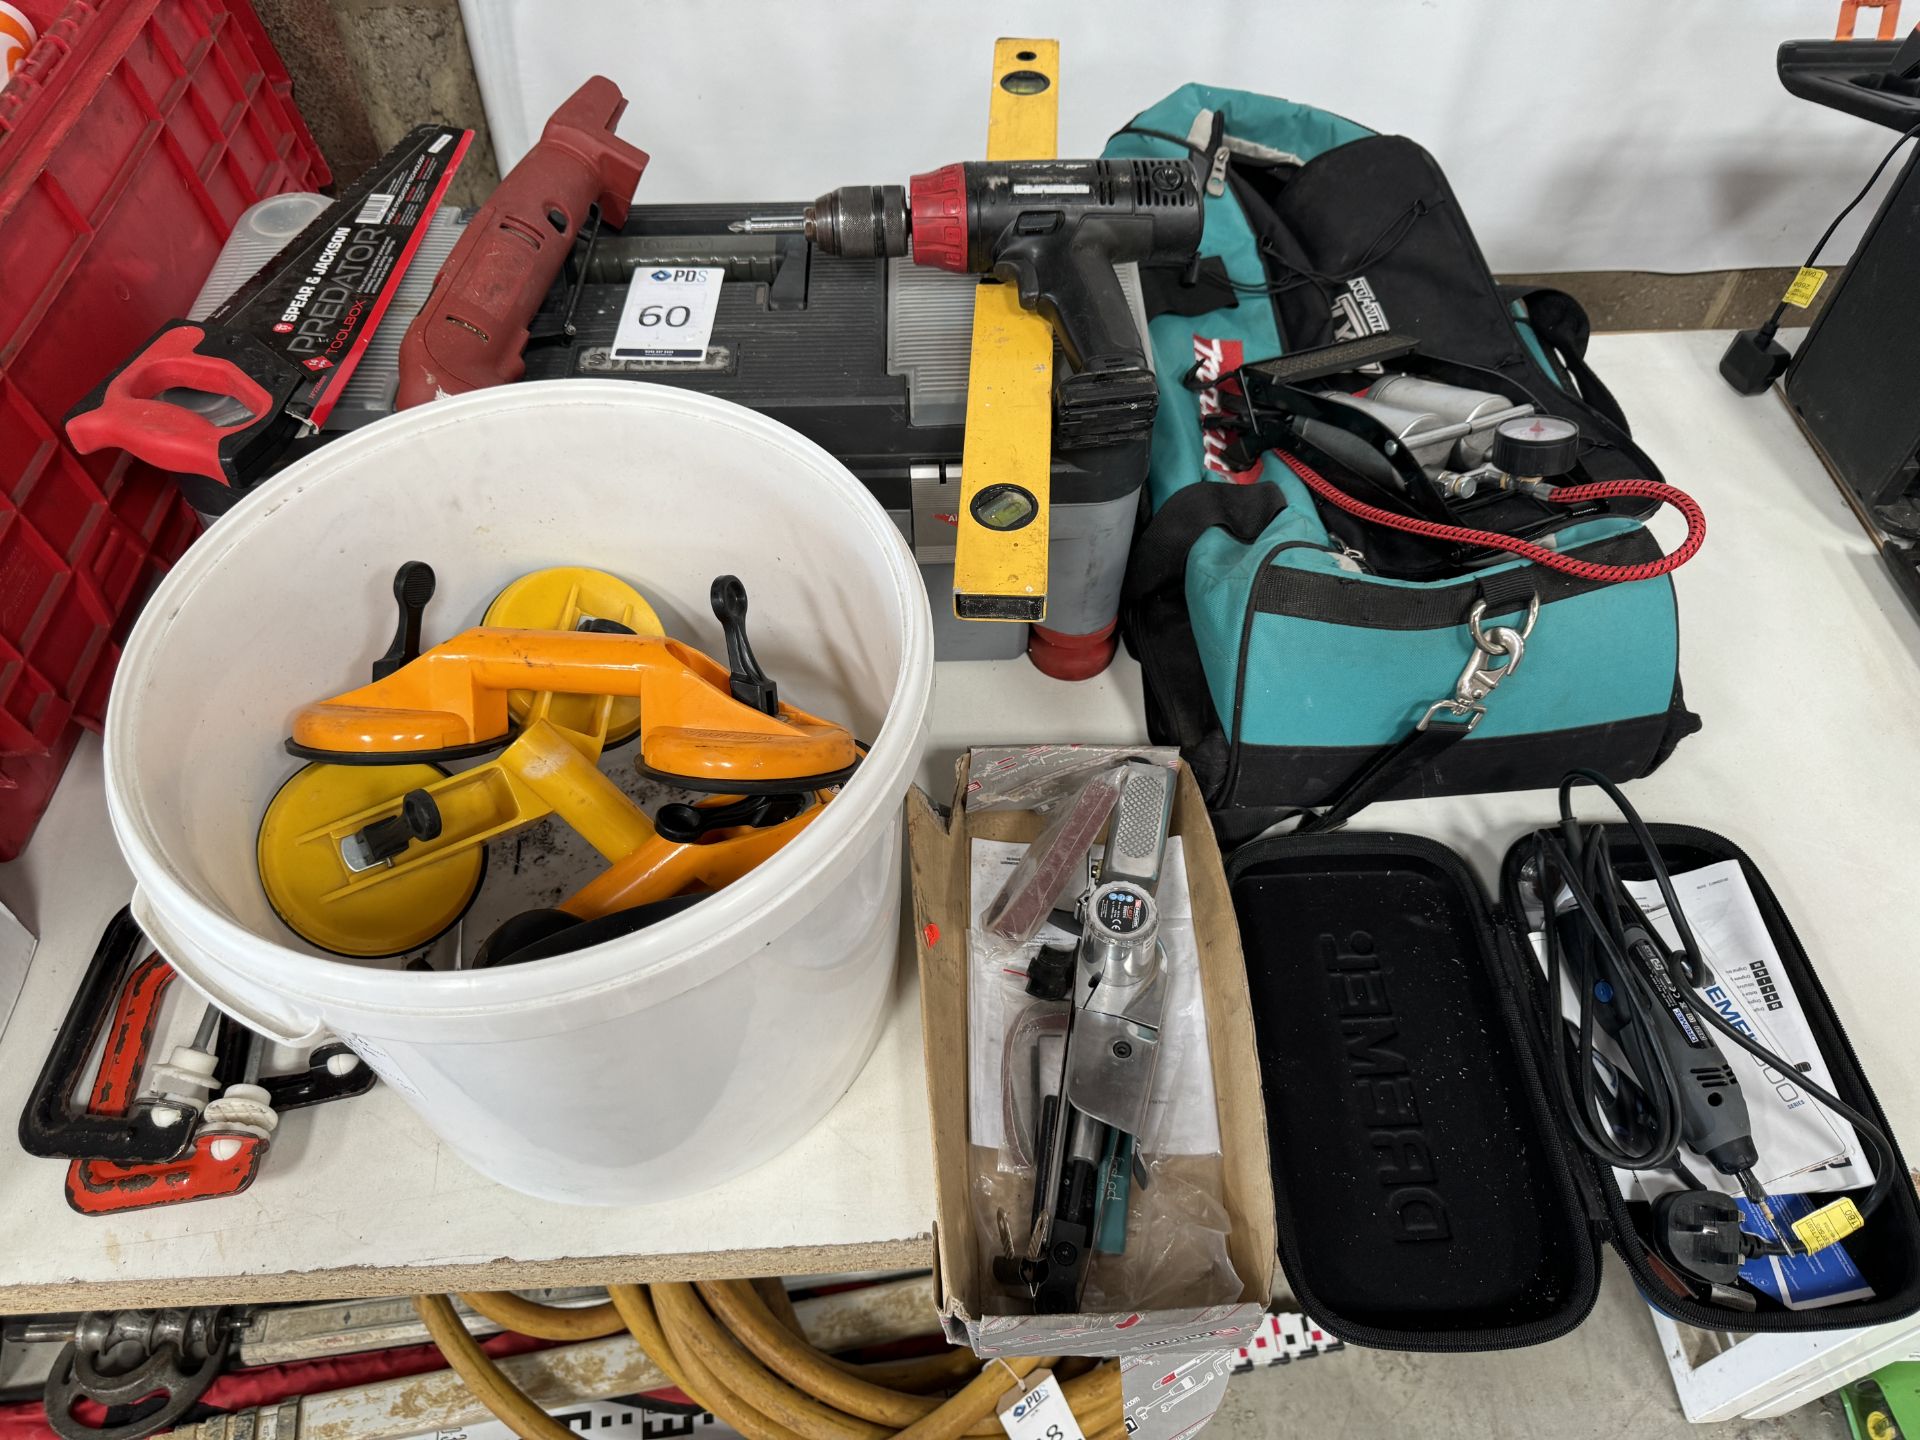 Quantity of Handtools, Toolbox, Toolbag, Clamps, Veribor Suction Holders etc. (Location: